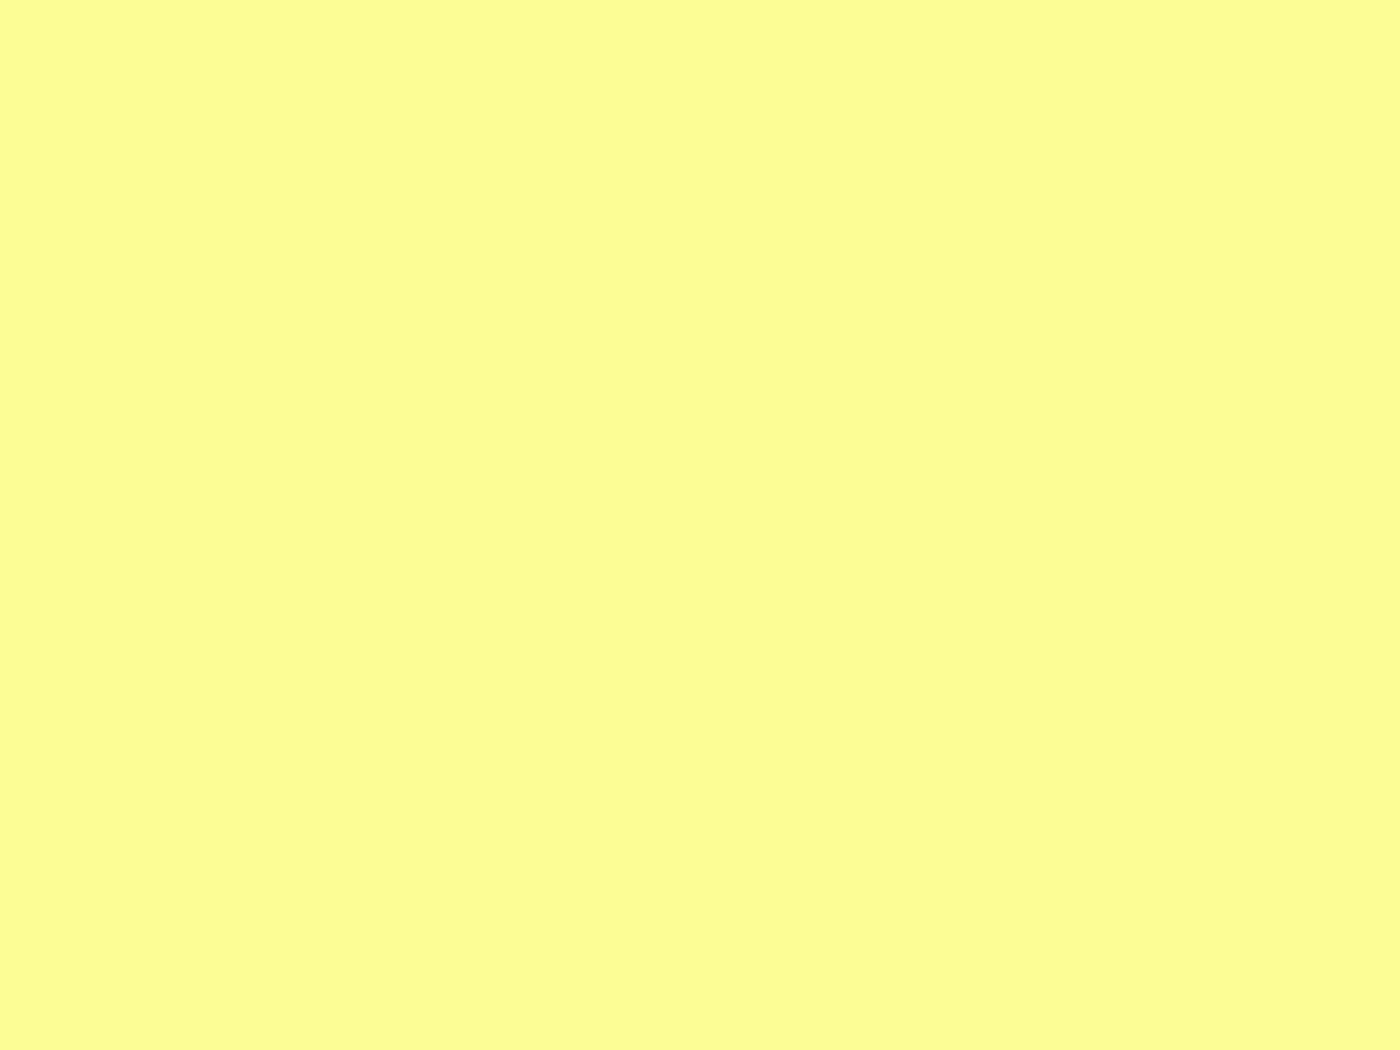 Free 1400x1050 resolution Pastel Yellow solid color background view